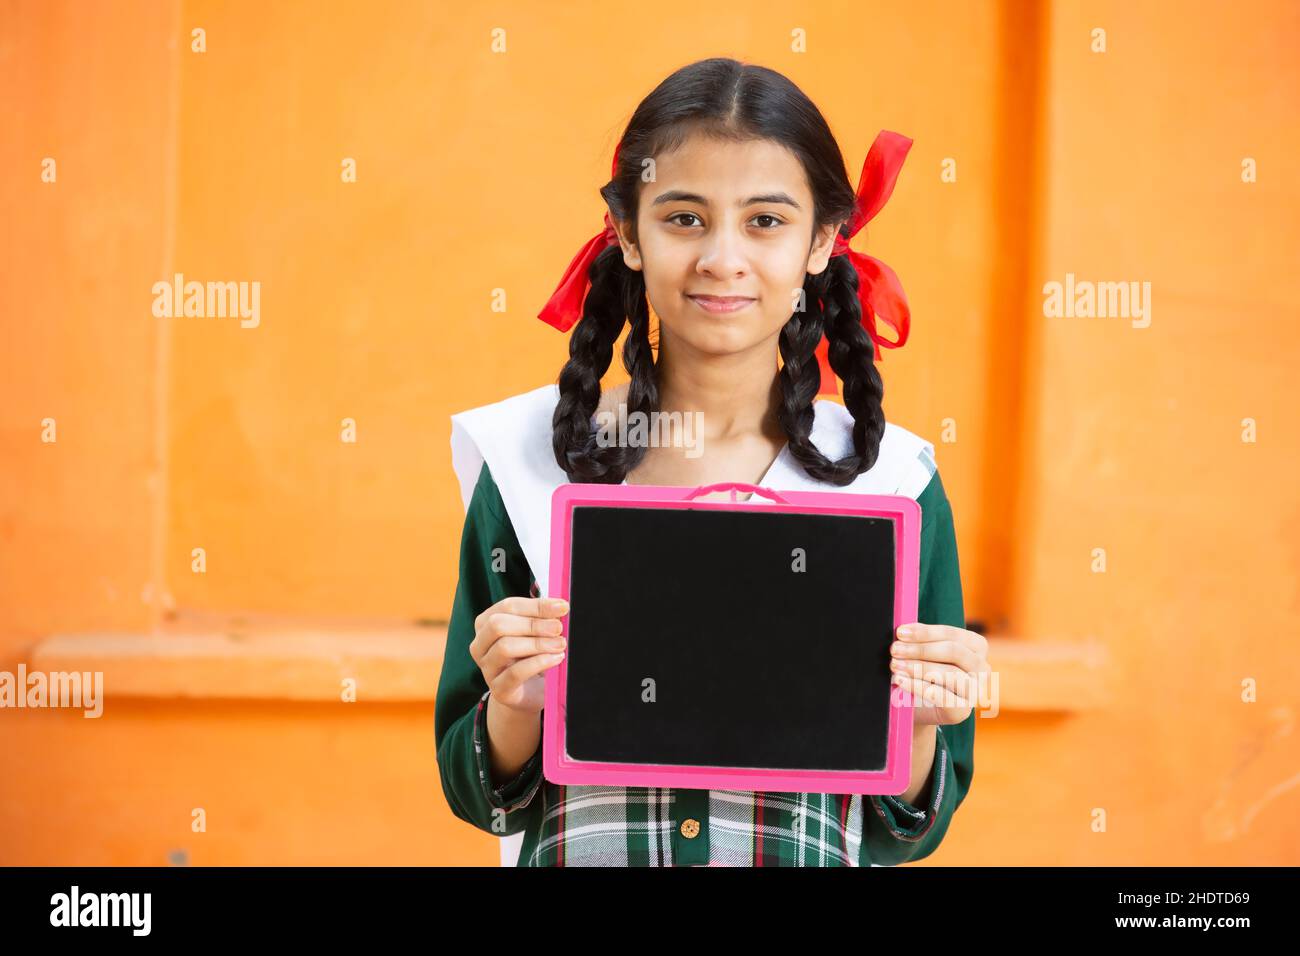 Young beautiful happy indian school girl holding slate against orange background, Smiling braided hair female teenager kid with black board. education Stock Photo